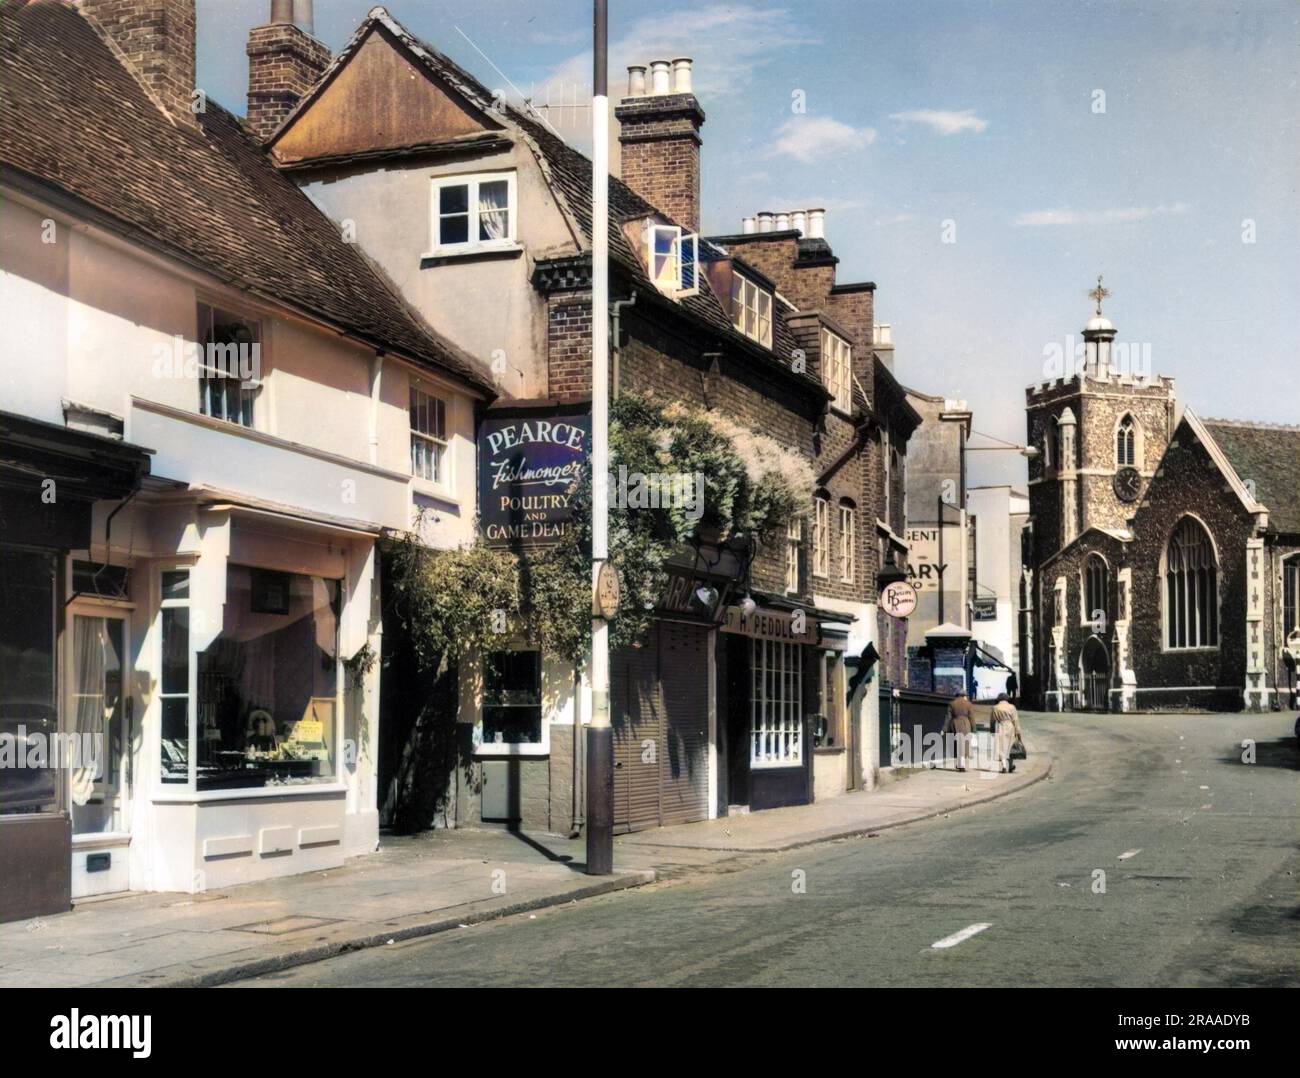 A picturesque corner of Vine Street, Uxbridge, in the London Borough of Hillingdon, England showing a glimpse of a parade of shops and the parish church.     Date: 1950s Stock Photo